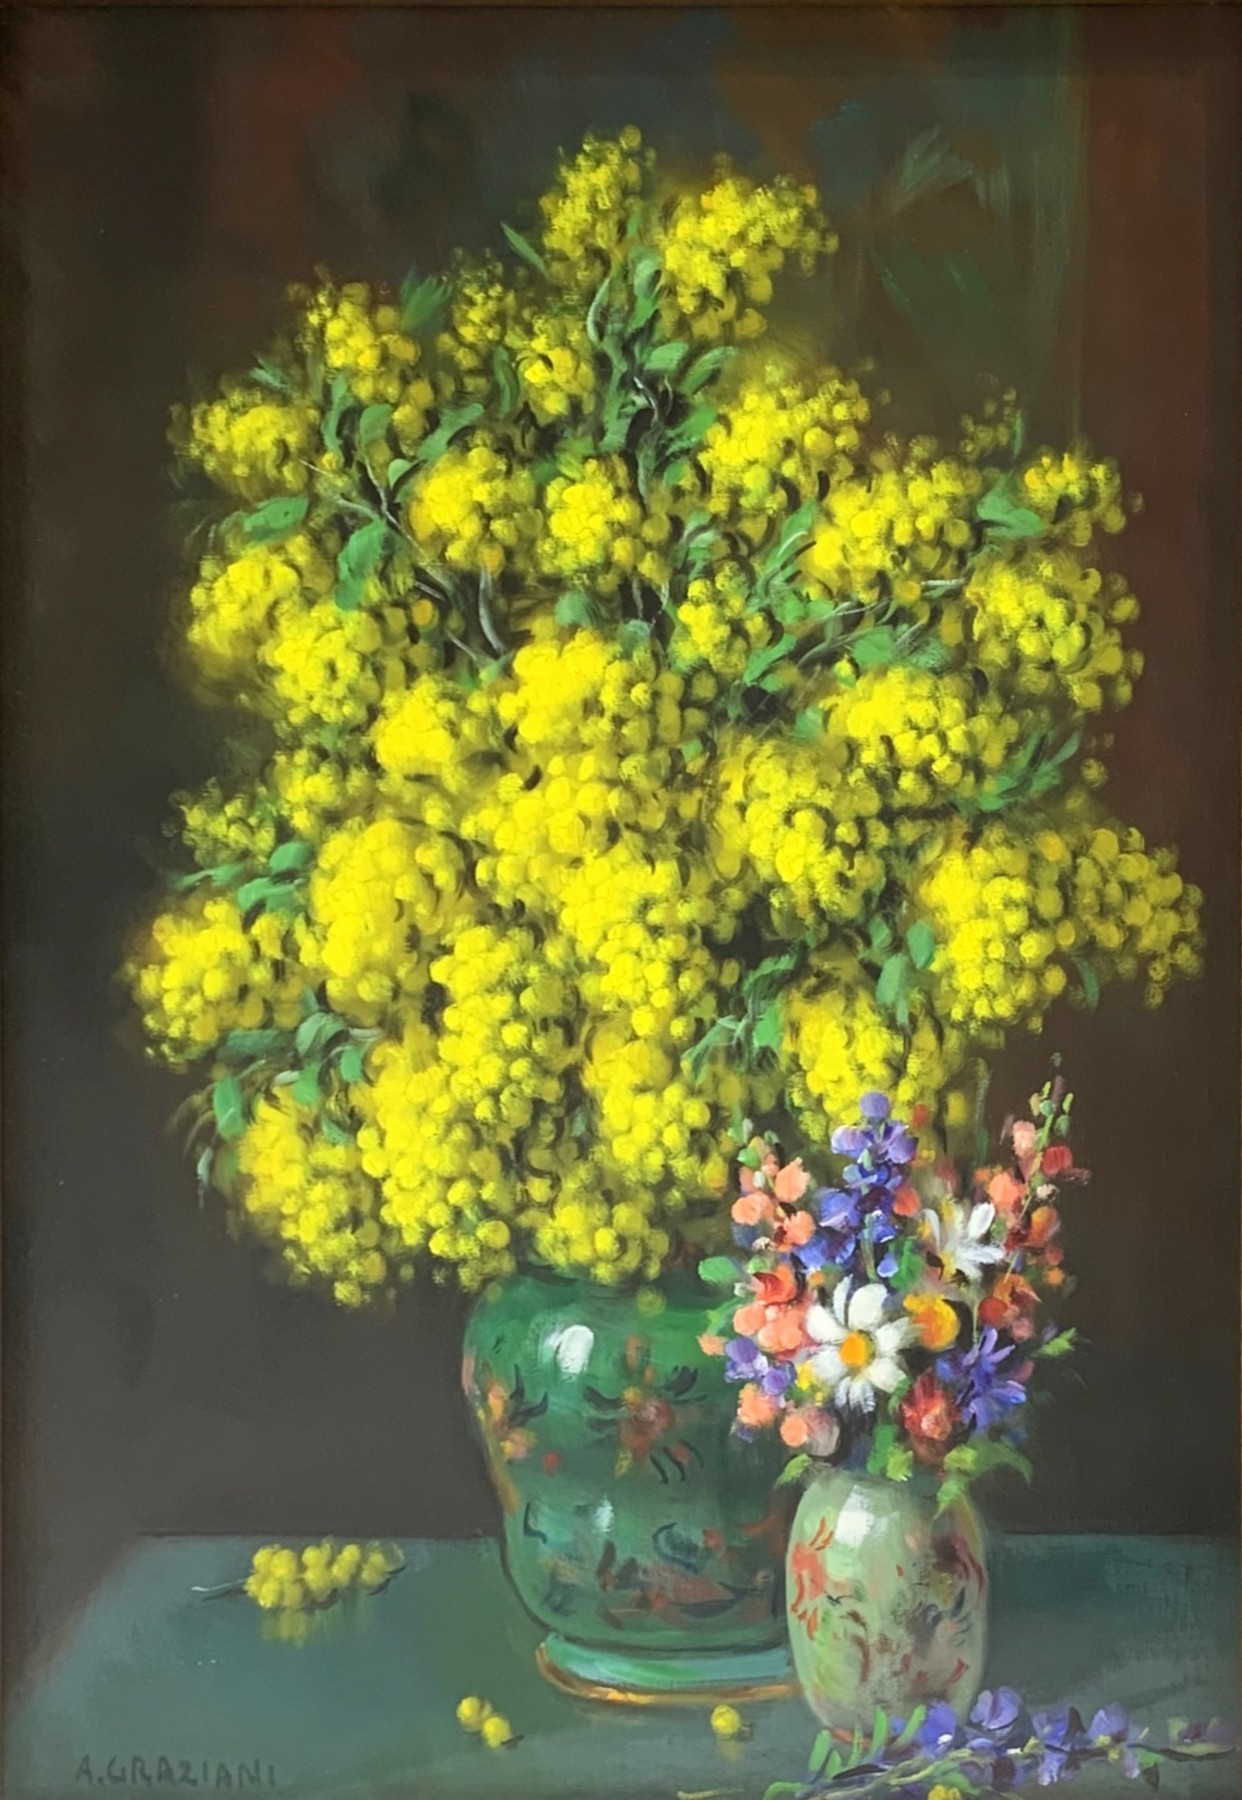 Oil painting on canvas depicting "Mimose with violets", signed on the lower left A. Graziani. Alfio